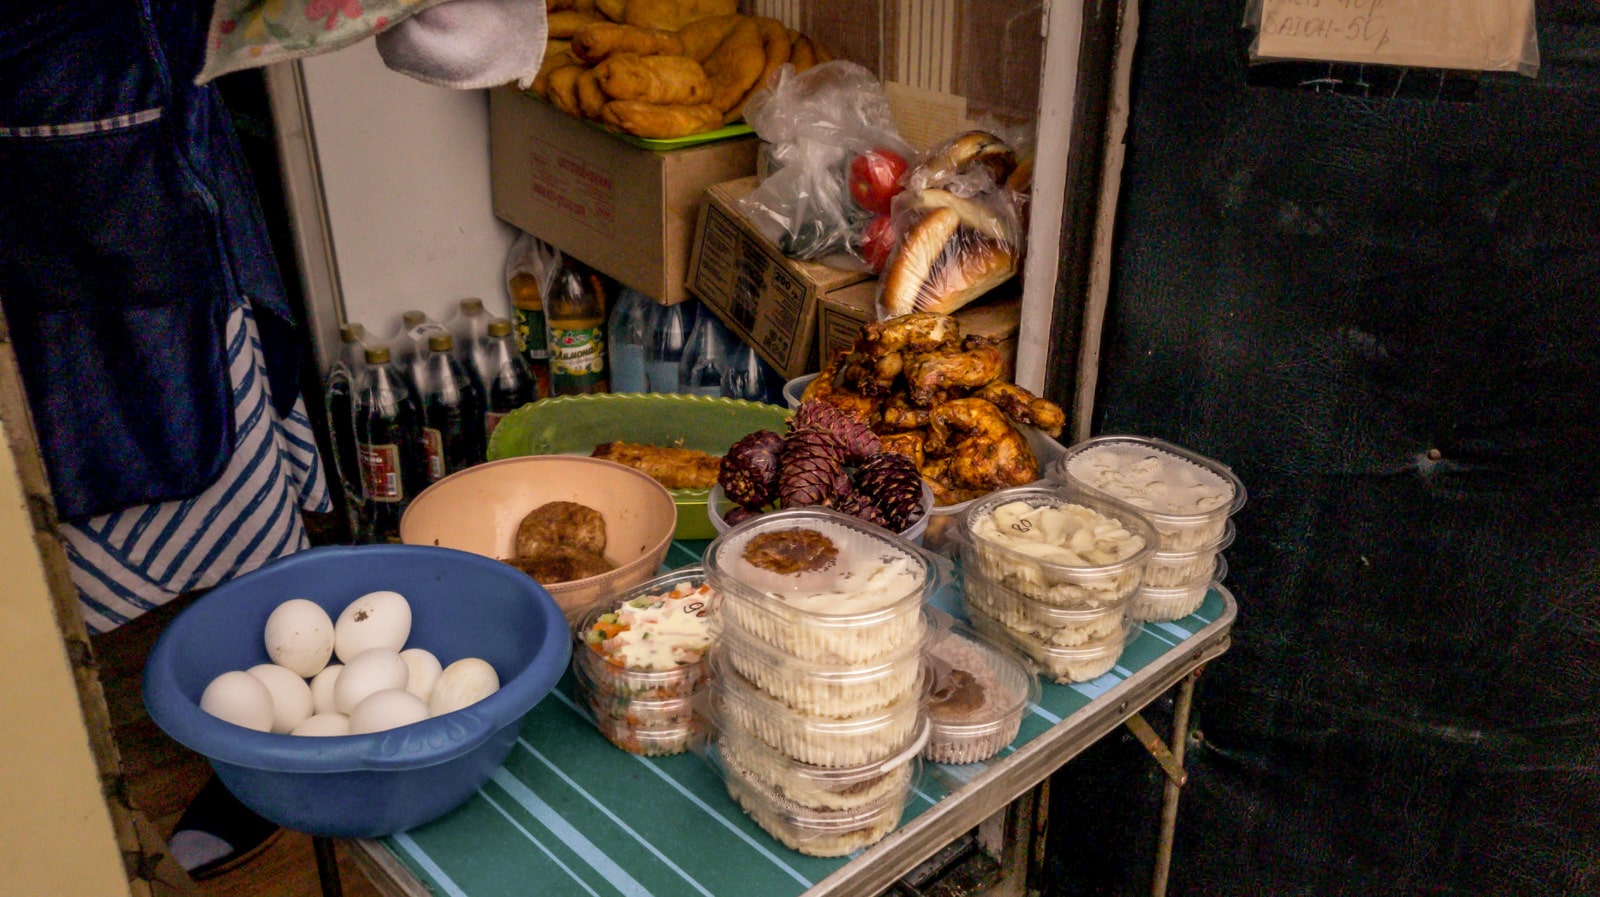 Pine cones and other snacks for sale at a Russian train station